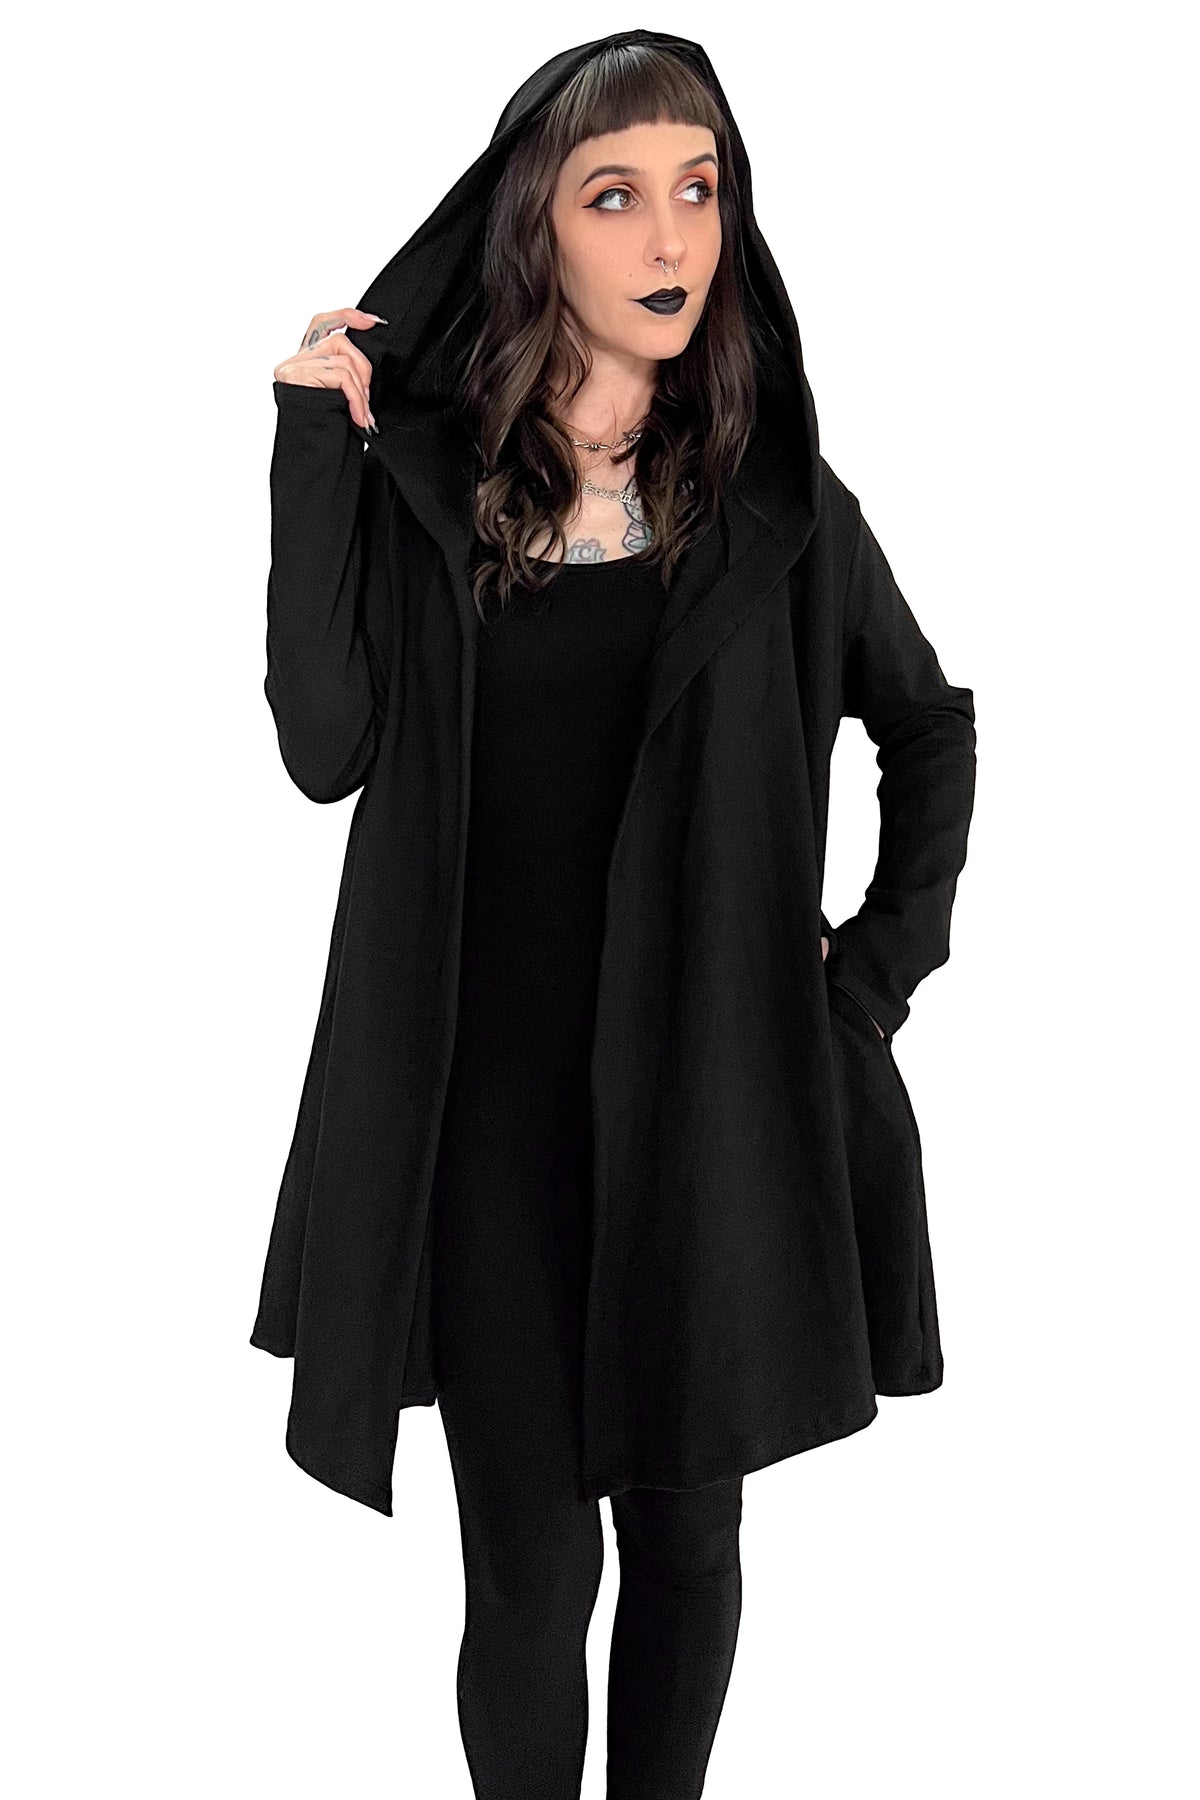 black hooded open front cardigan with thumbholes